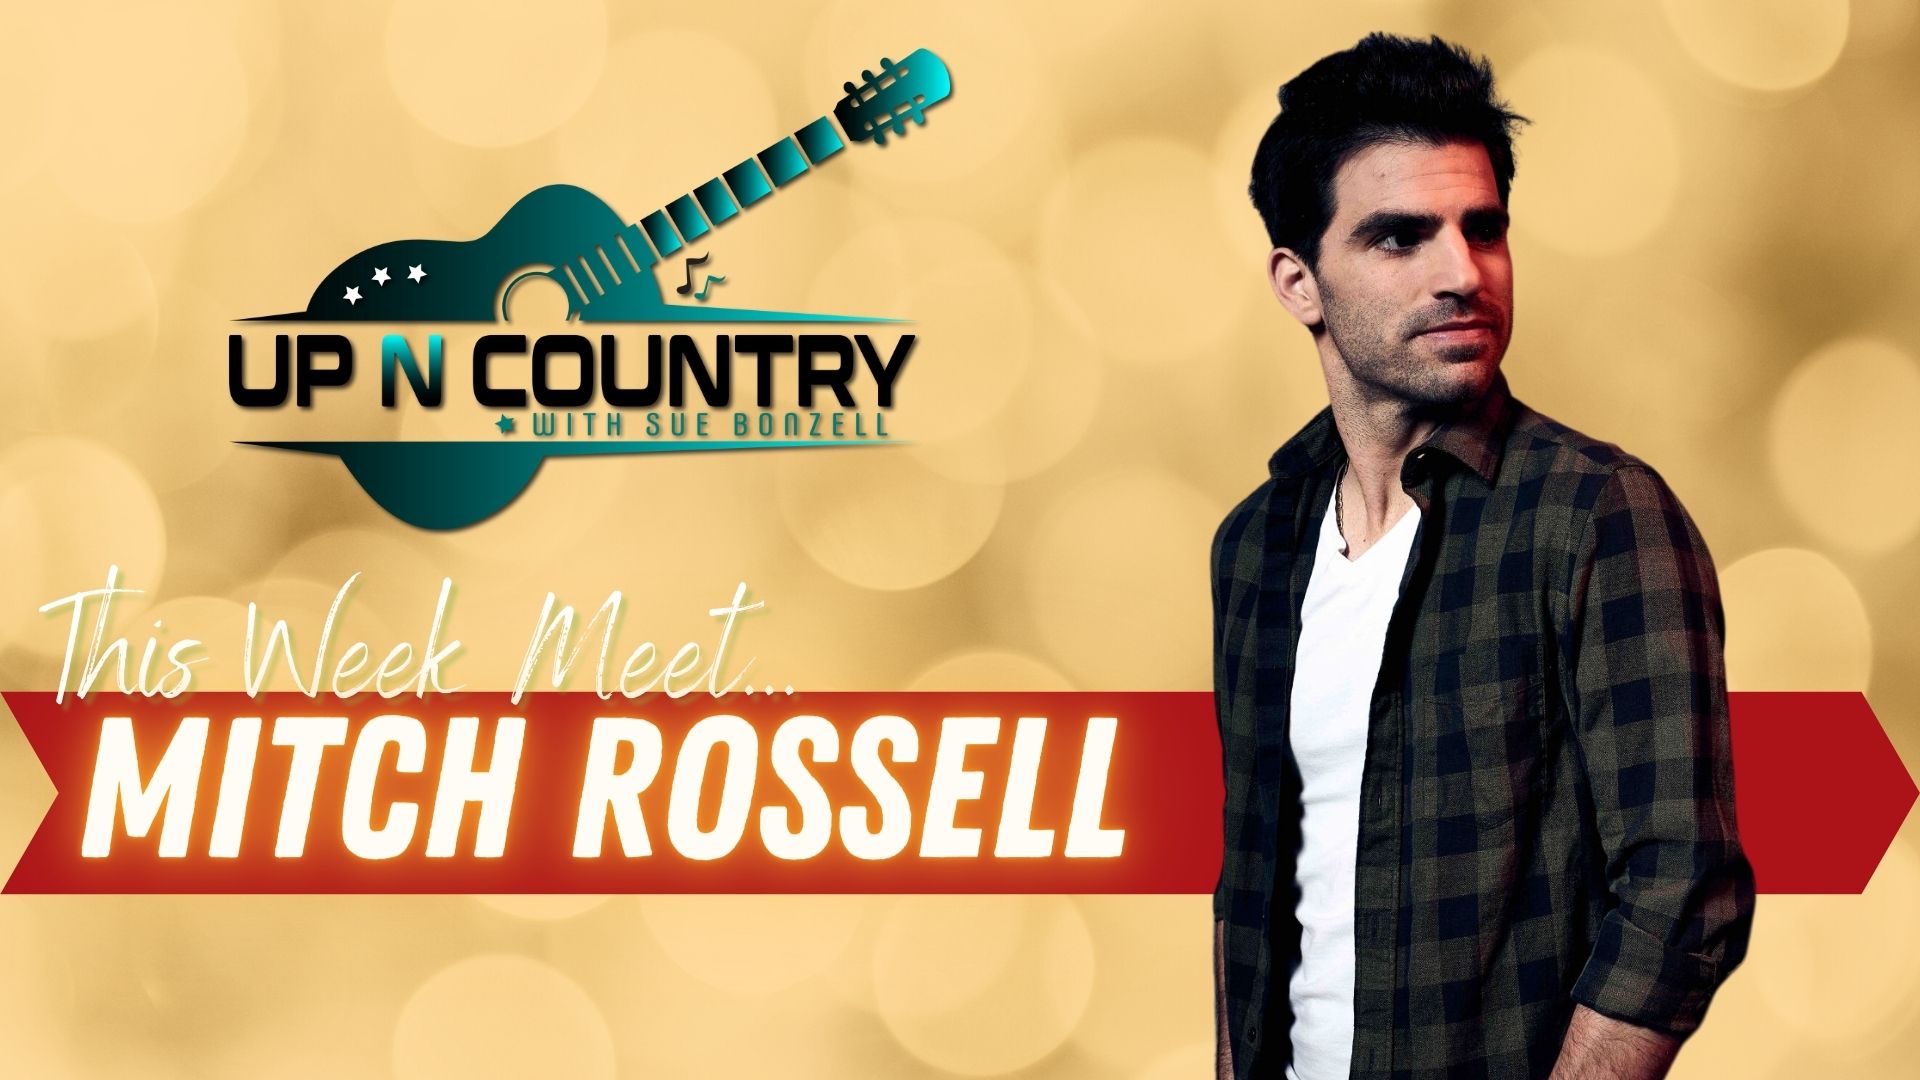 mitch rossell tour dates